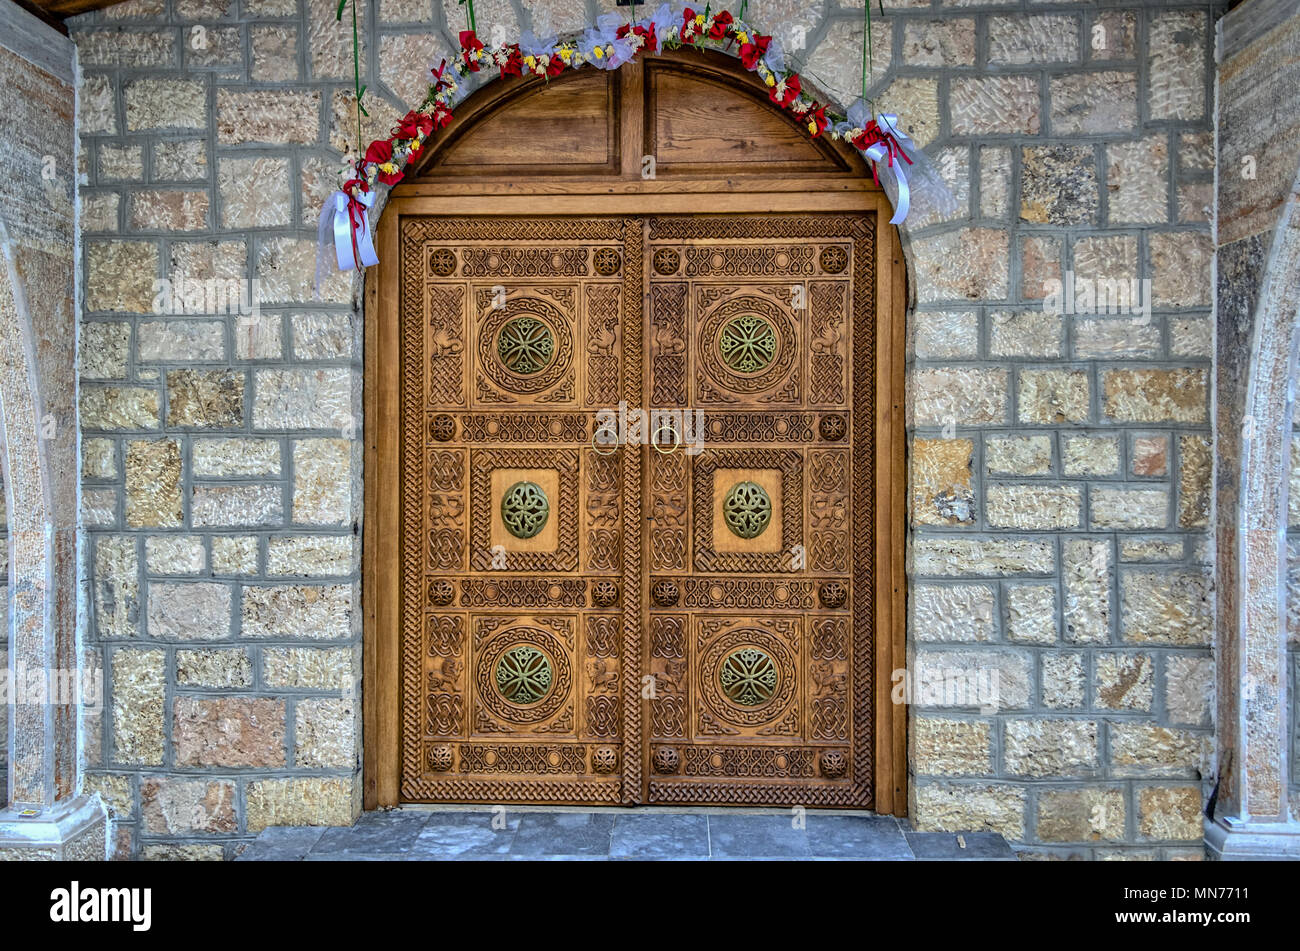 Very Ornate Engraved Wooden Brown Door of Eastern Orthodox Church / Chapel with Arch and Brass Embellishments - Kalista / Kalishta Monastery Macedonia Stock Photo